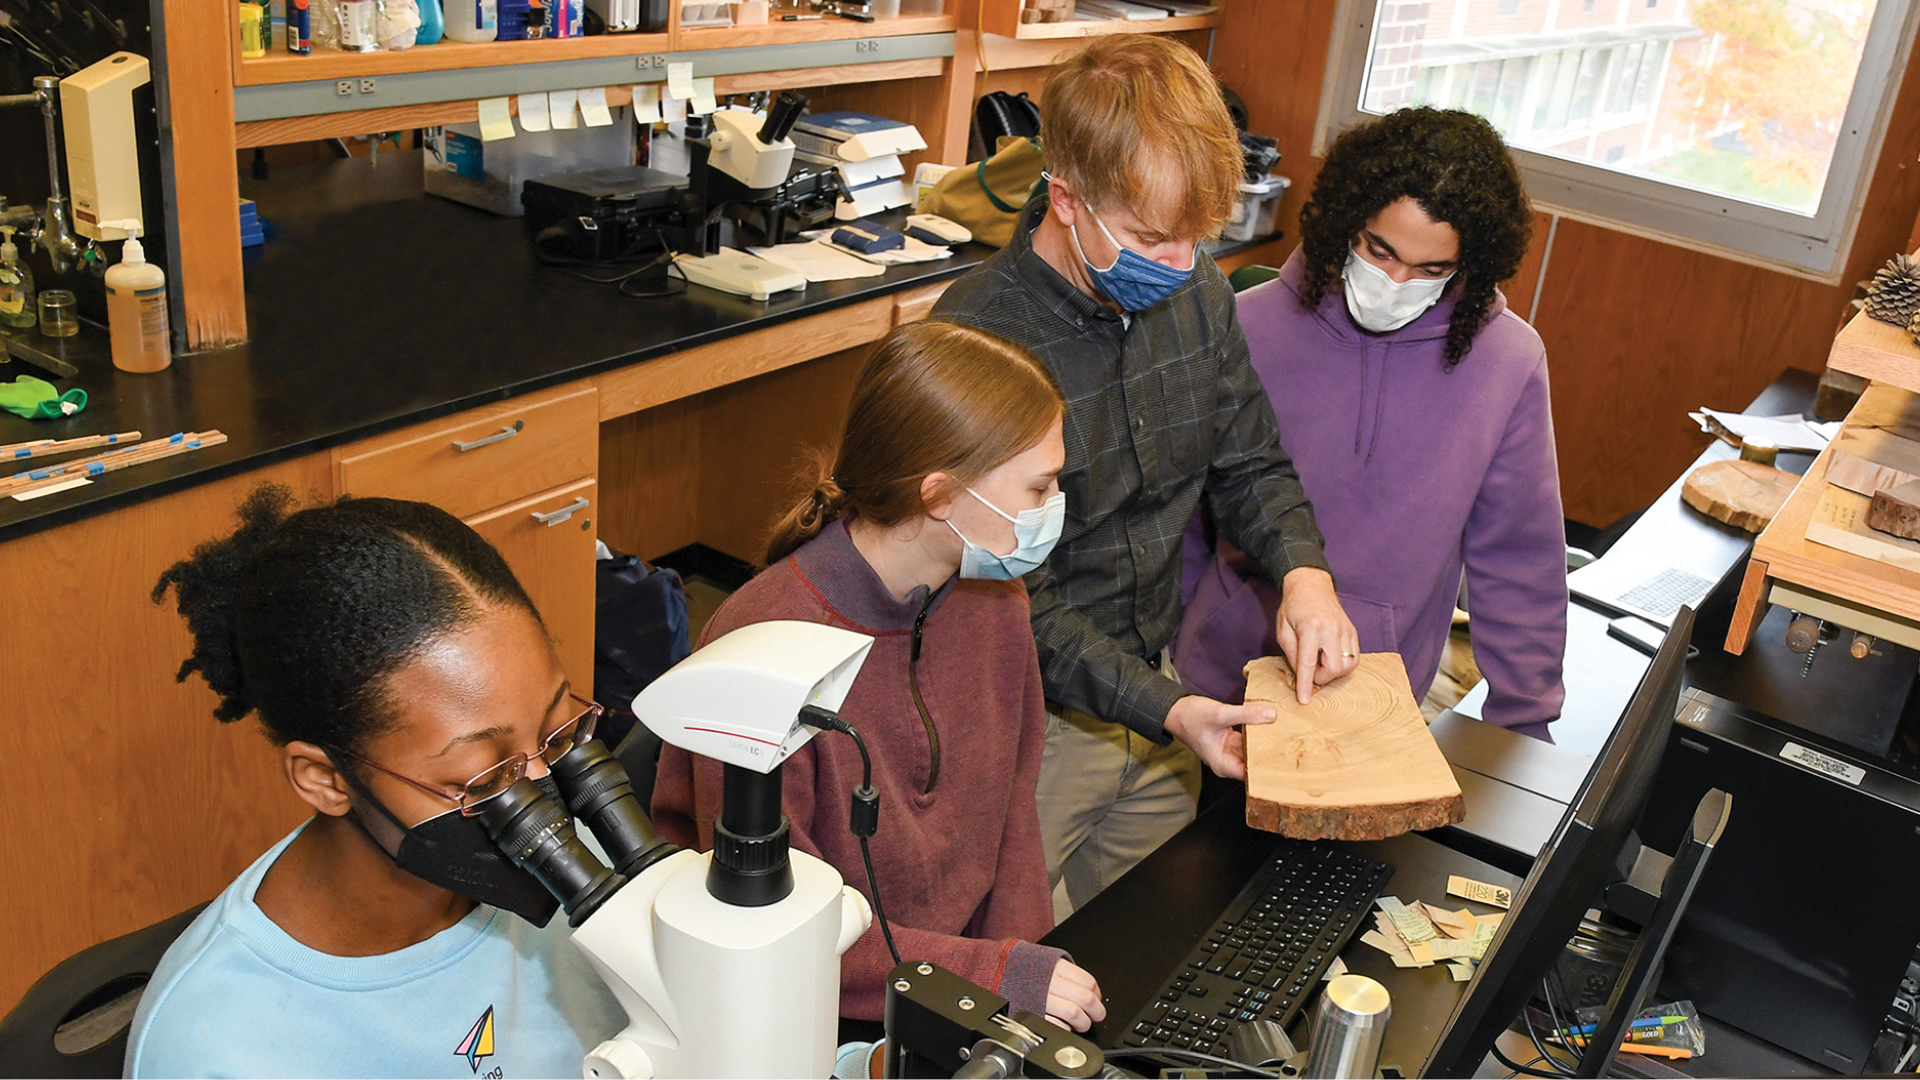 Dr. Daniel Druckenbrod and students work in lab